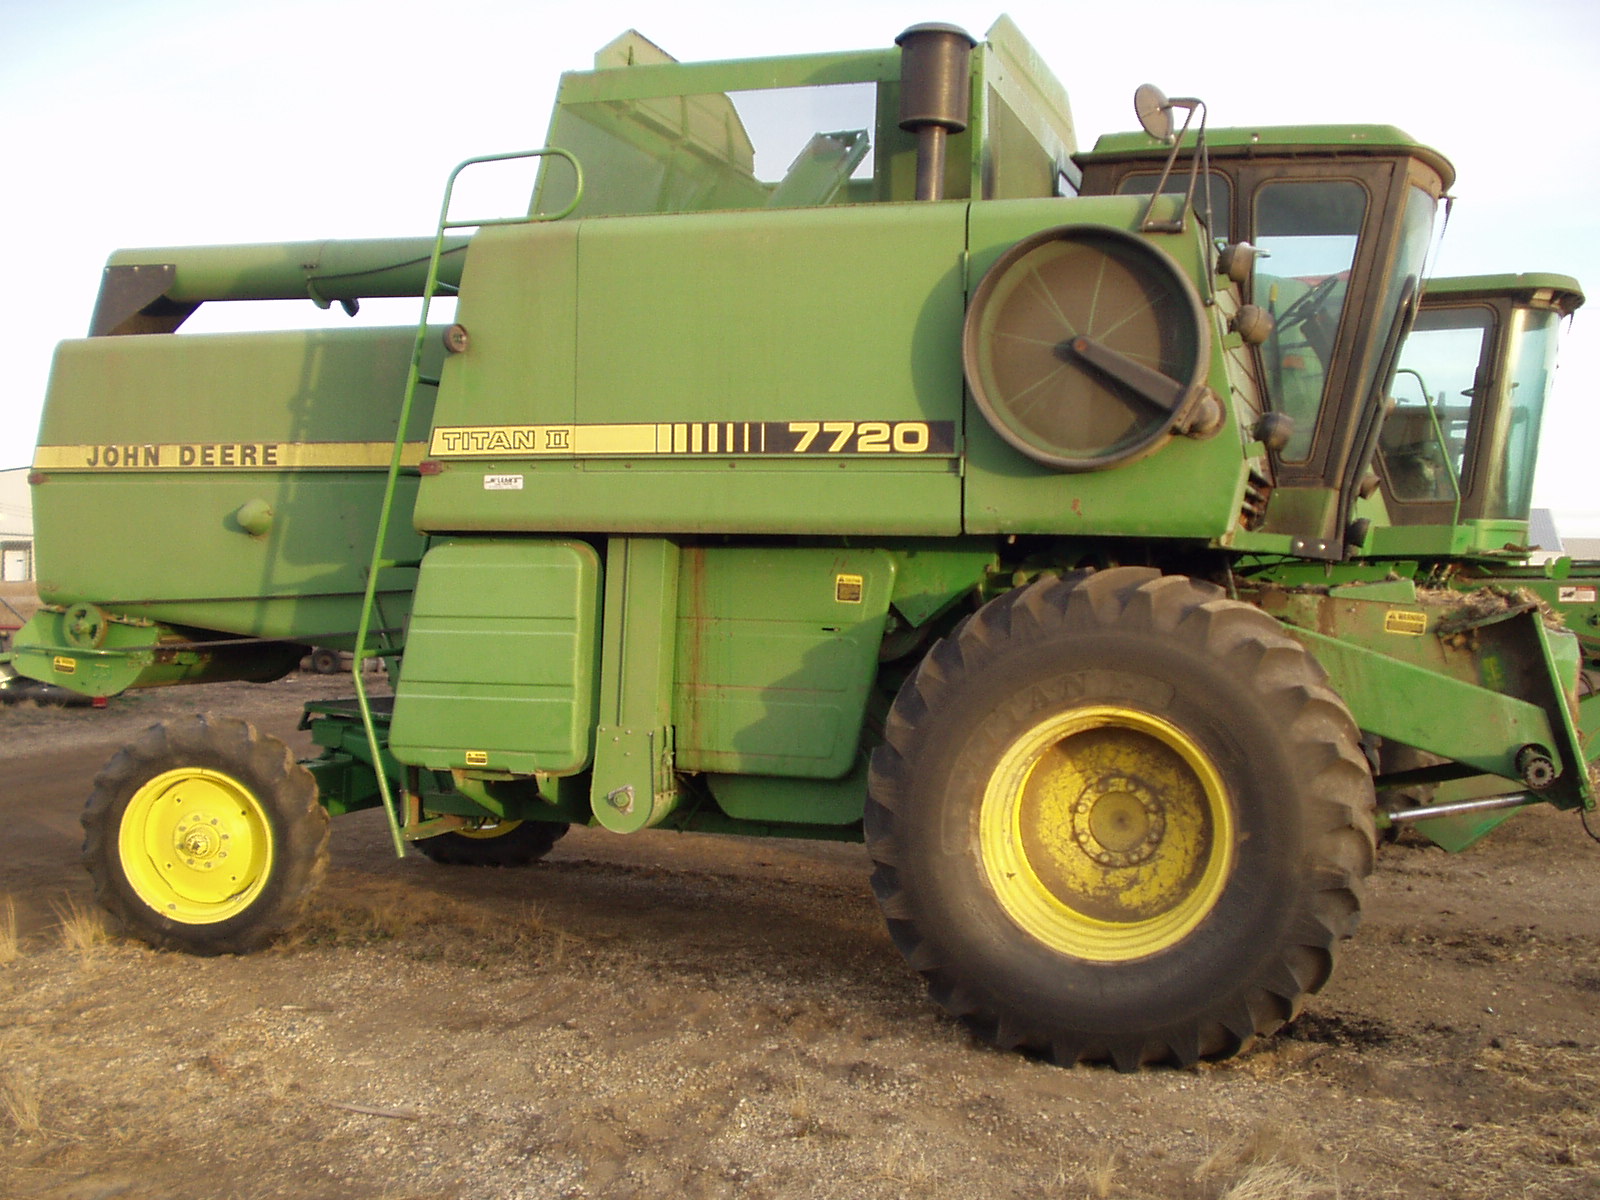 7720 john deere combine - group picture, image by tag.